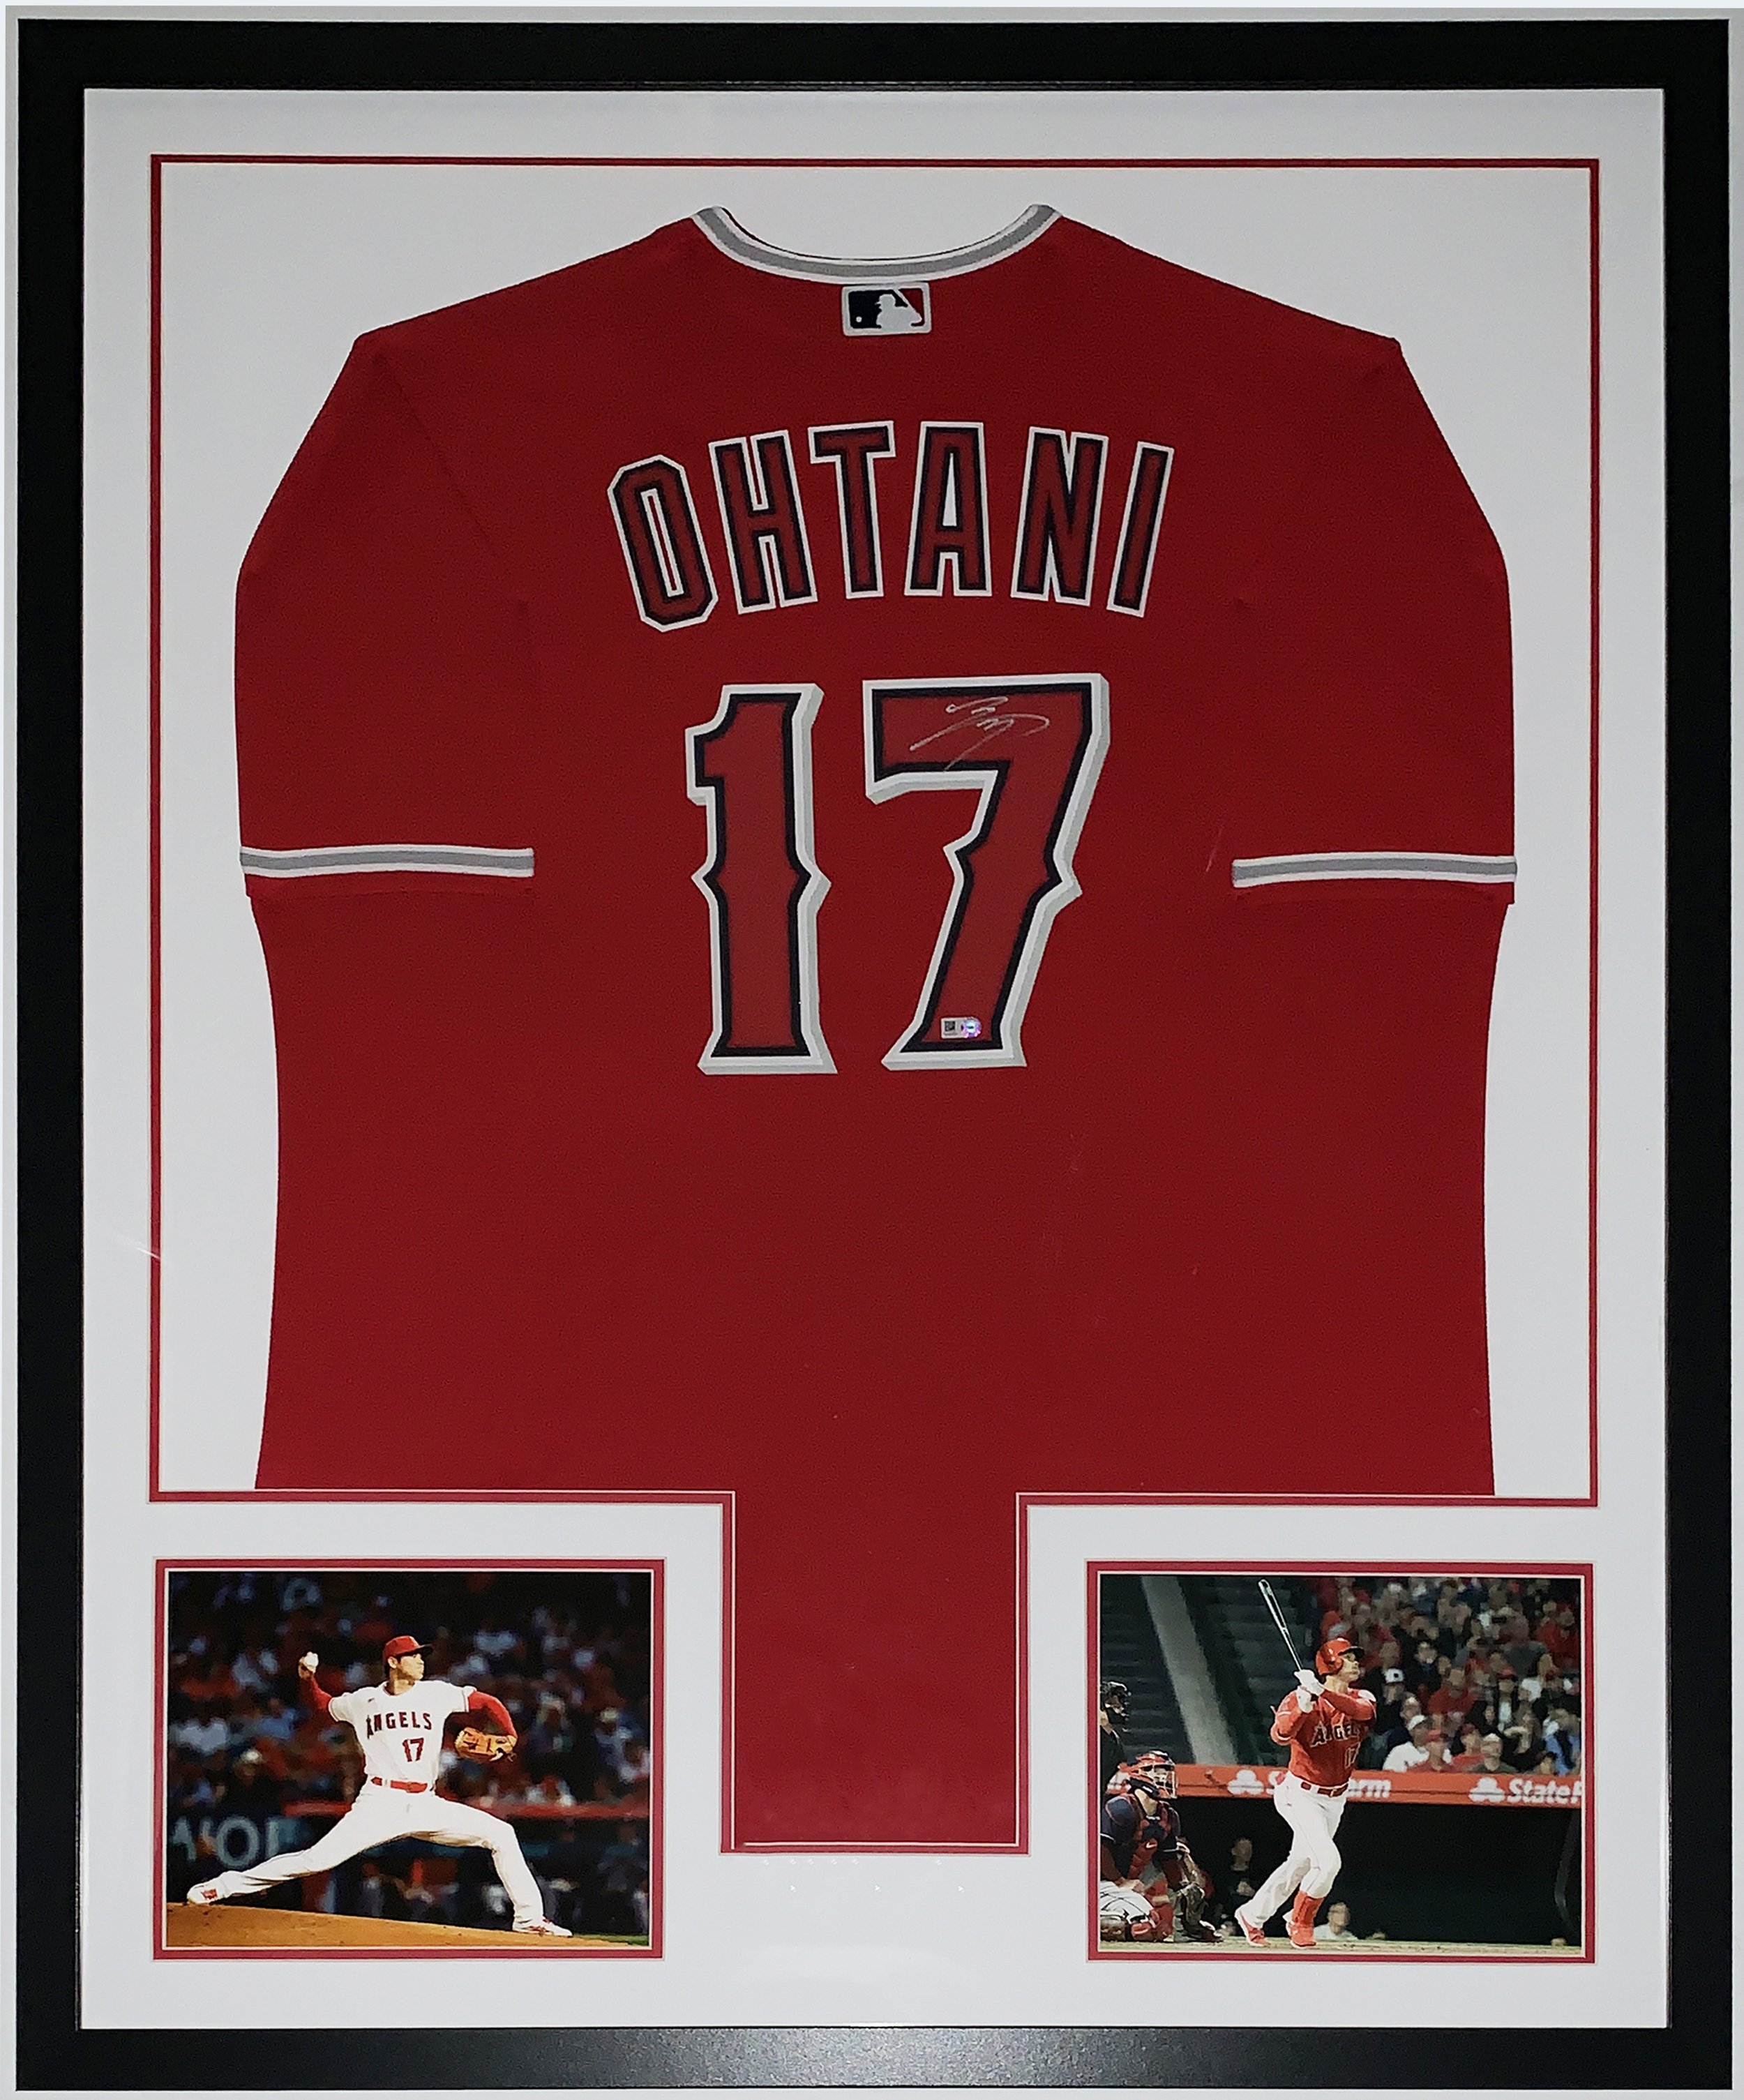 ohtani jersey authentic